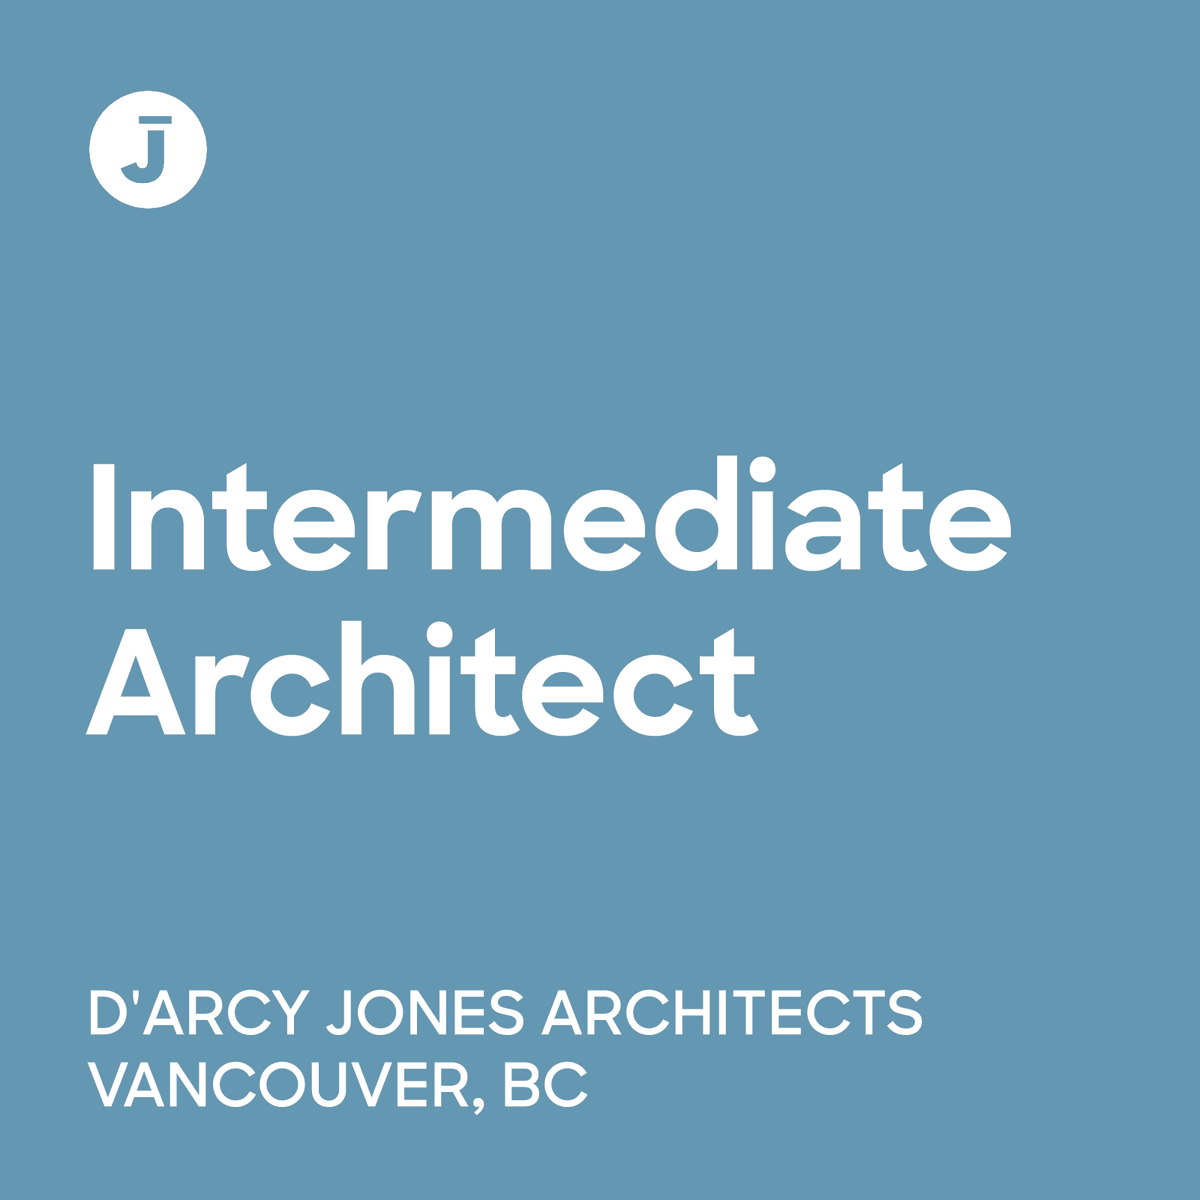 Today's Employer of the Day is D'Arcy Jones Architects @darcy_jones. They're currently hiring an Intermediate Architect in Vancouver.

bit.ly/441hFMy

#ArchinectJobs #ArchinectEOTD #ArchitectureJobs #DesignJobs #VancouverJobs